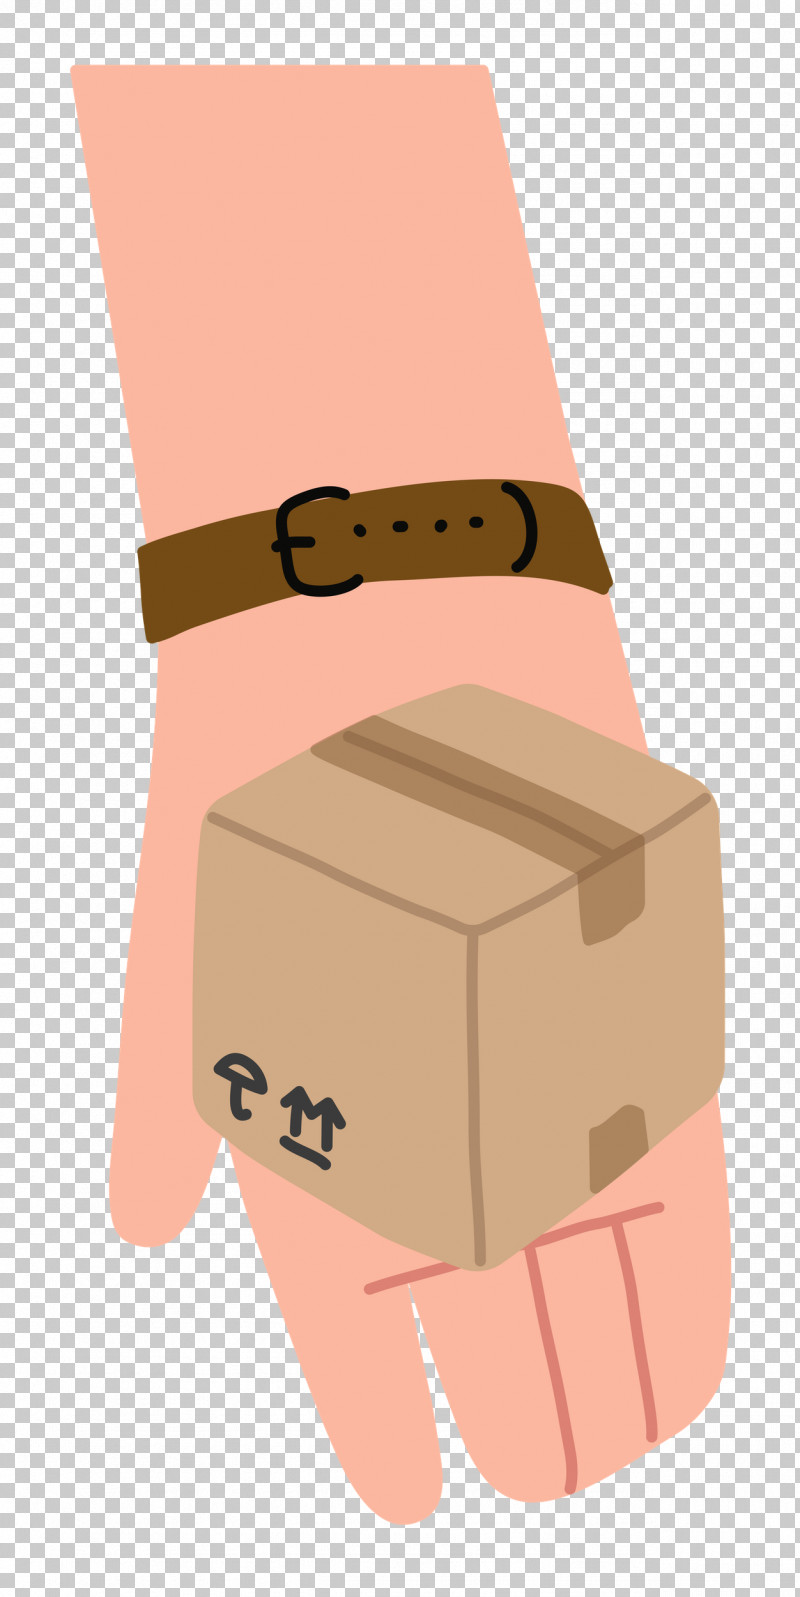 Hand Giving Box PNG, Clipart, Box, Cartoon, Hm, Meter Free PNG Download